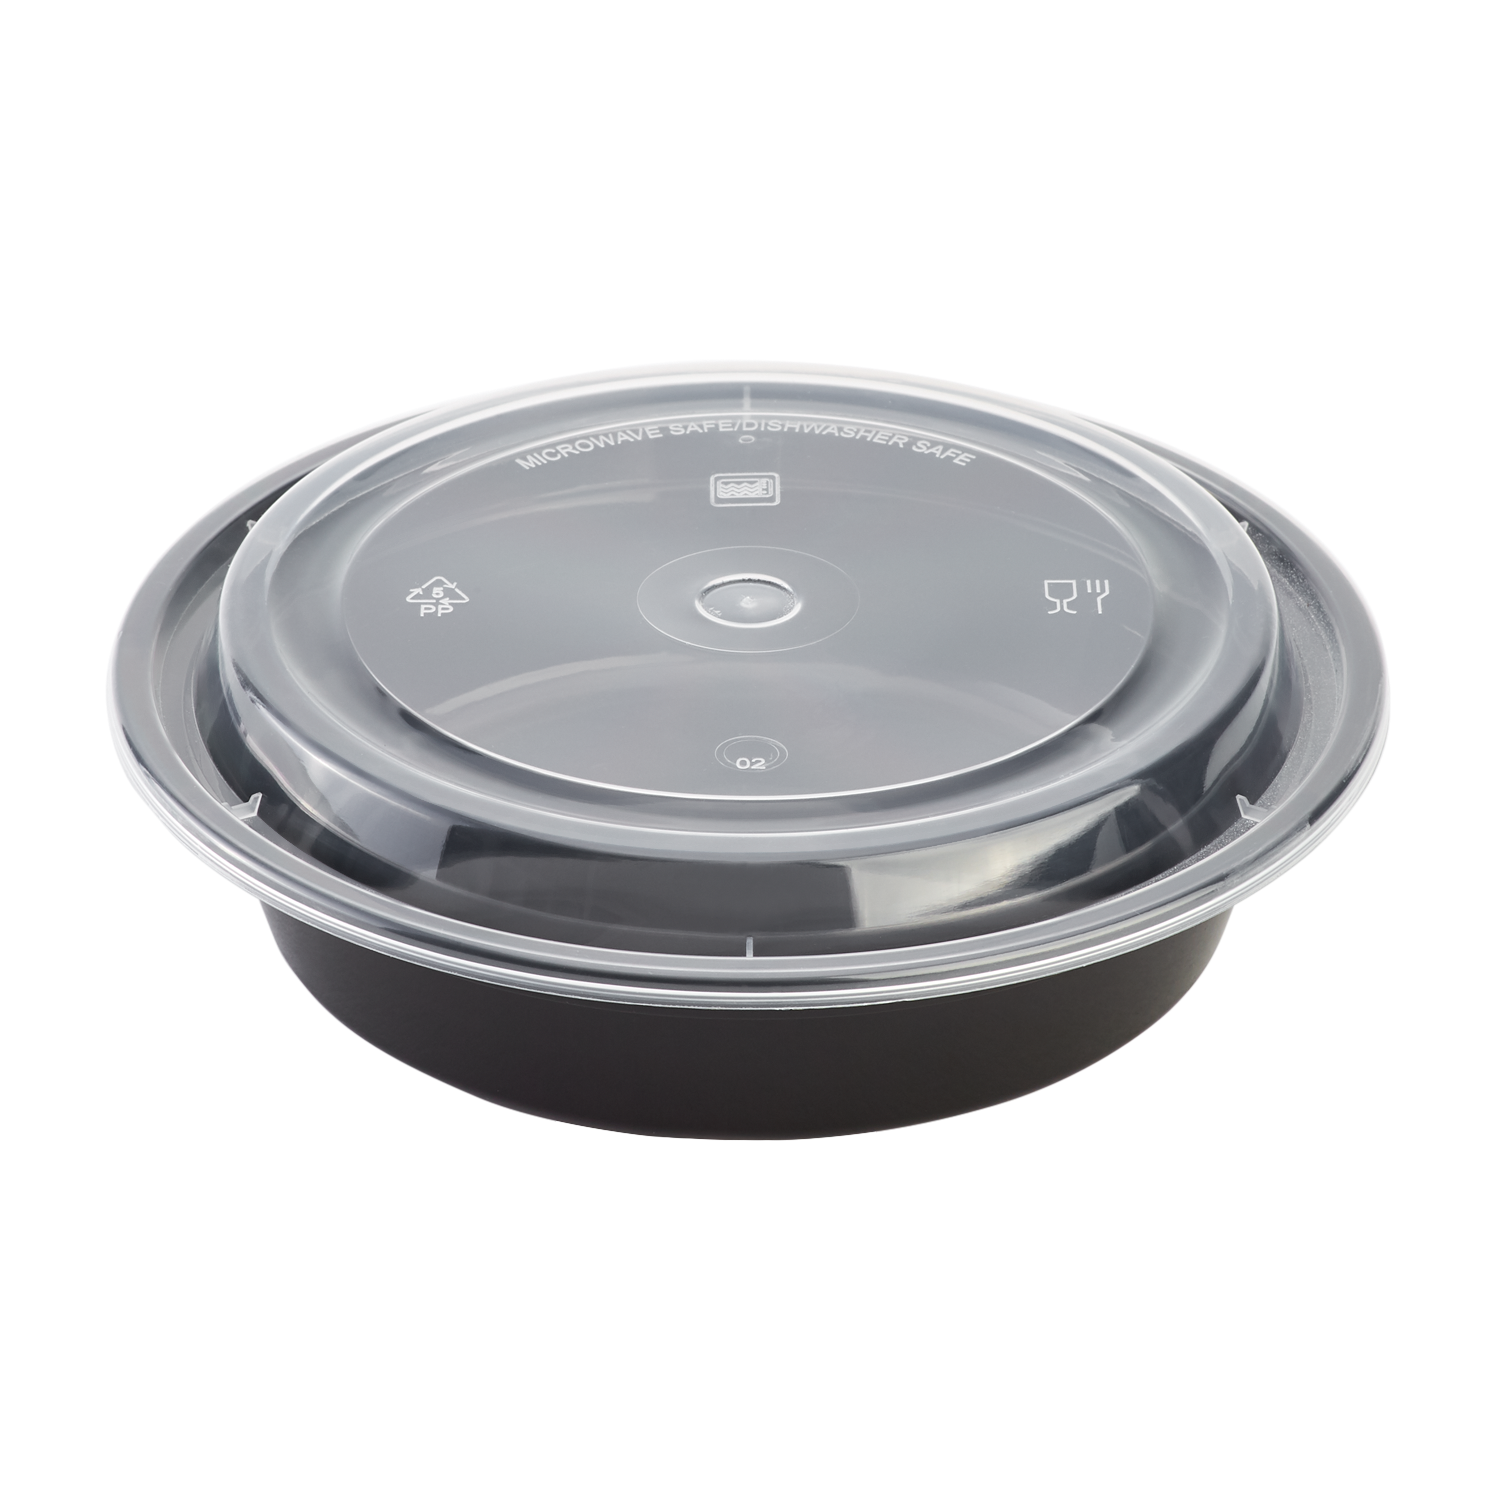 CTC-8377] Round Meal Prep Bowl Container with Lids - 24oz (50/100